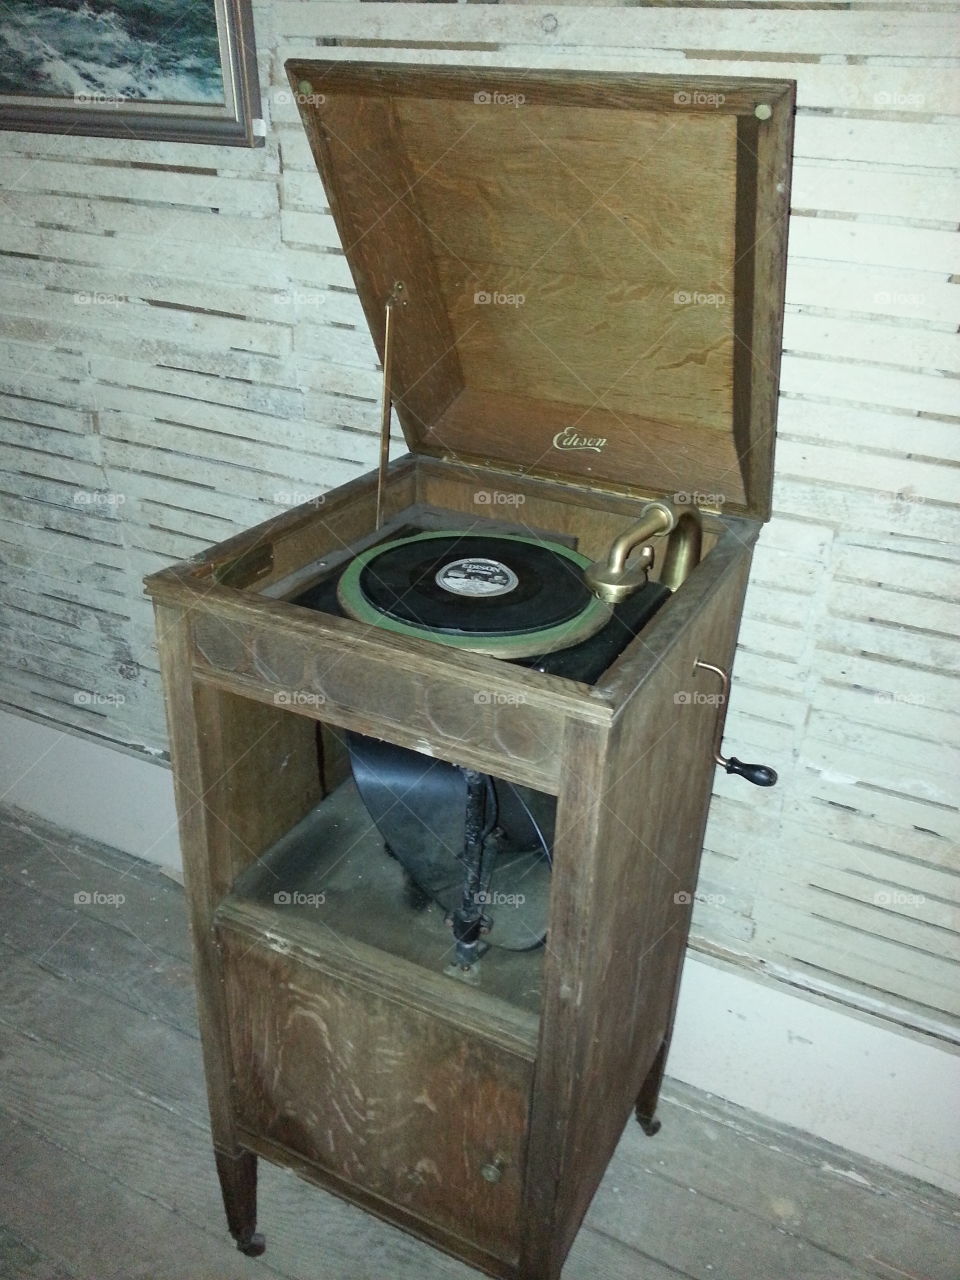 Old, antique Edison record player.